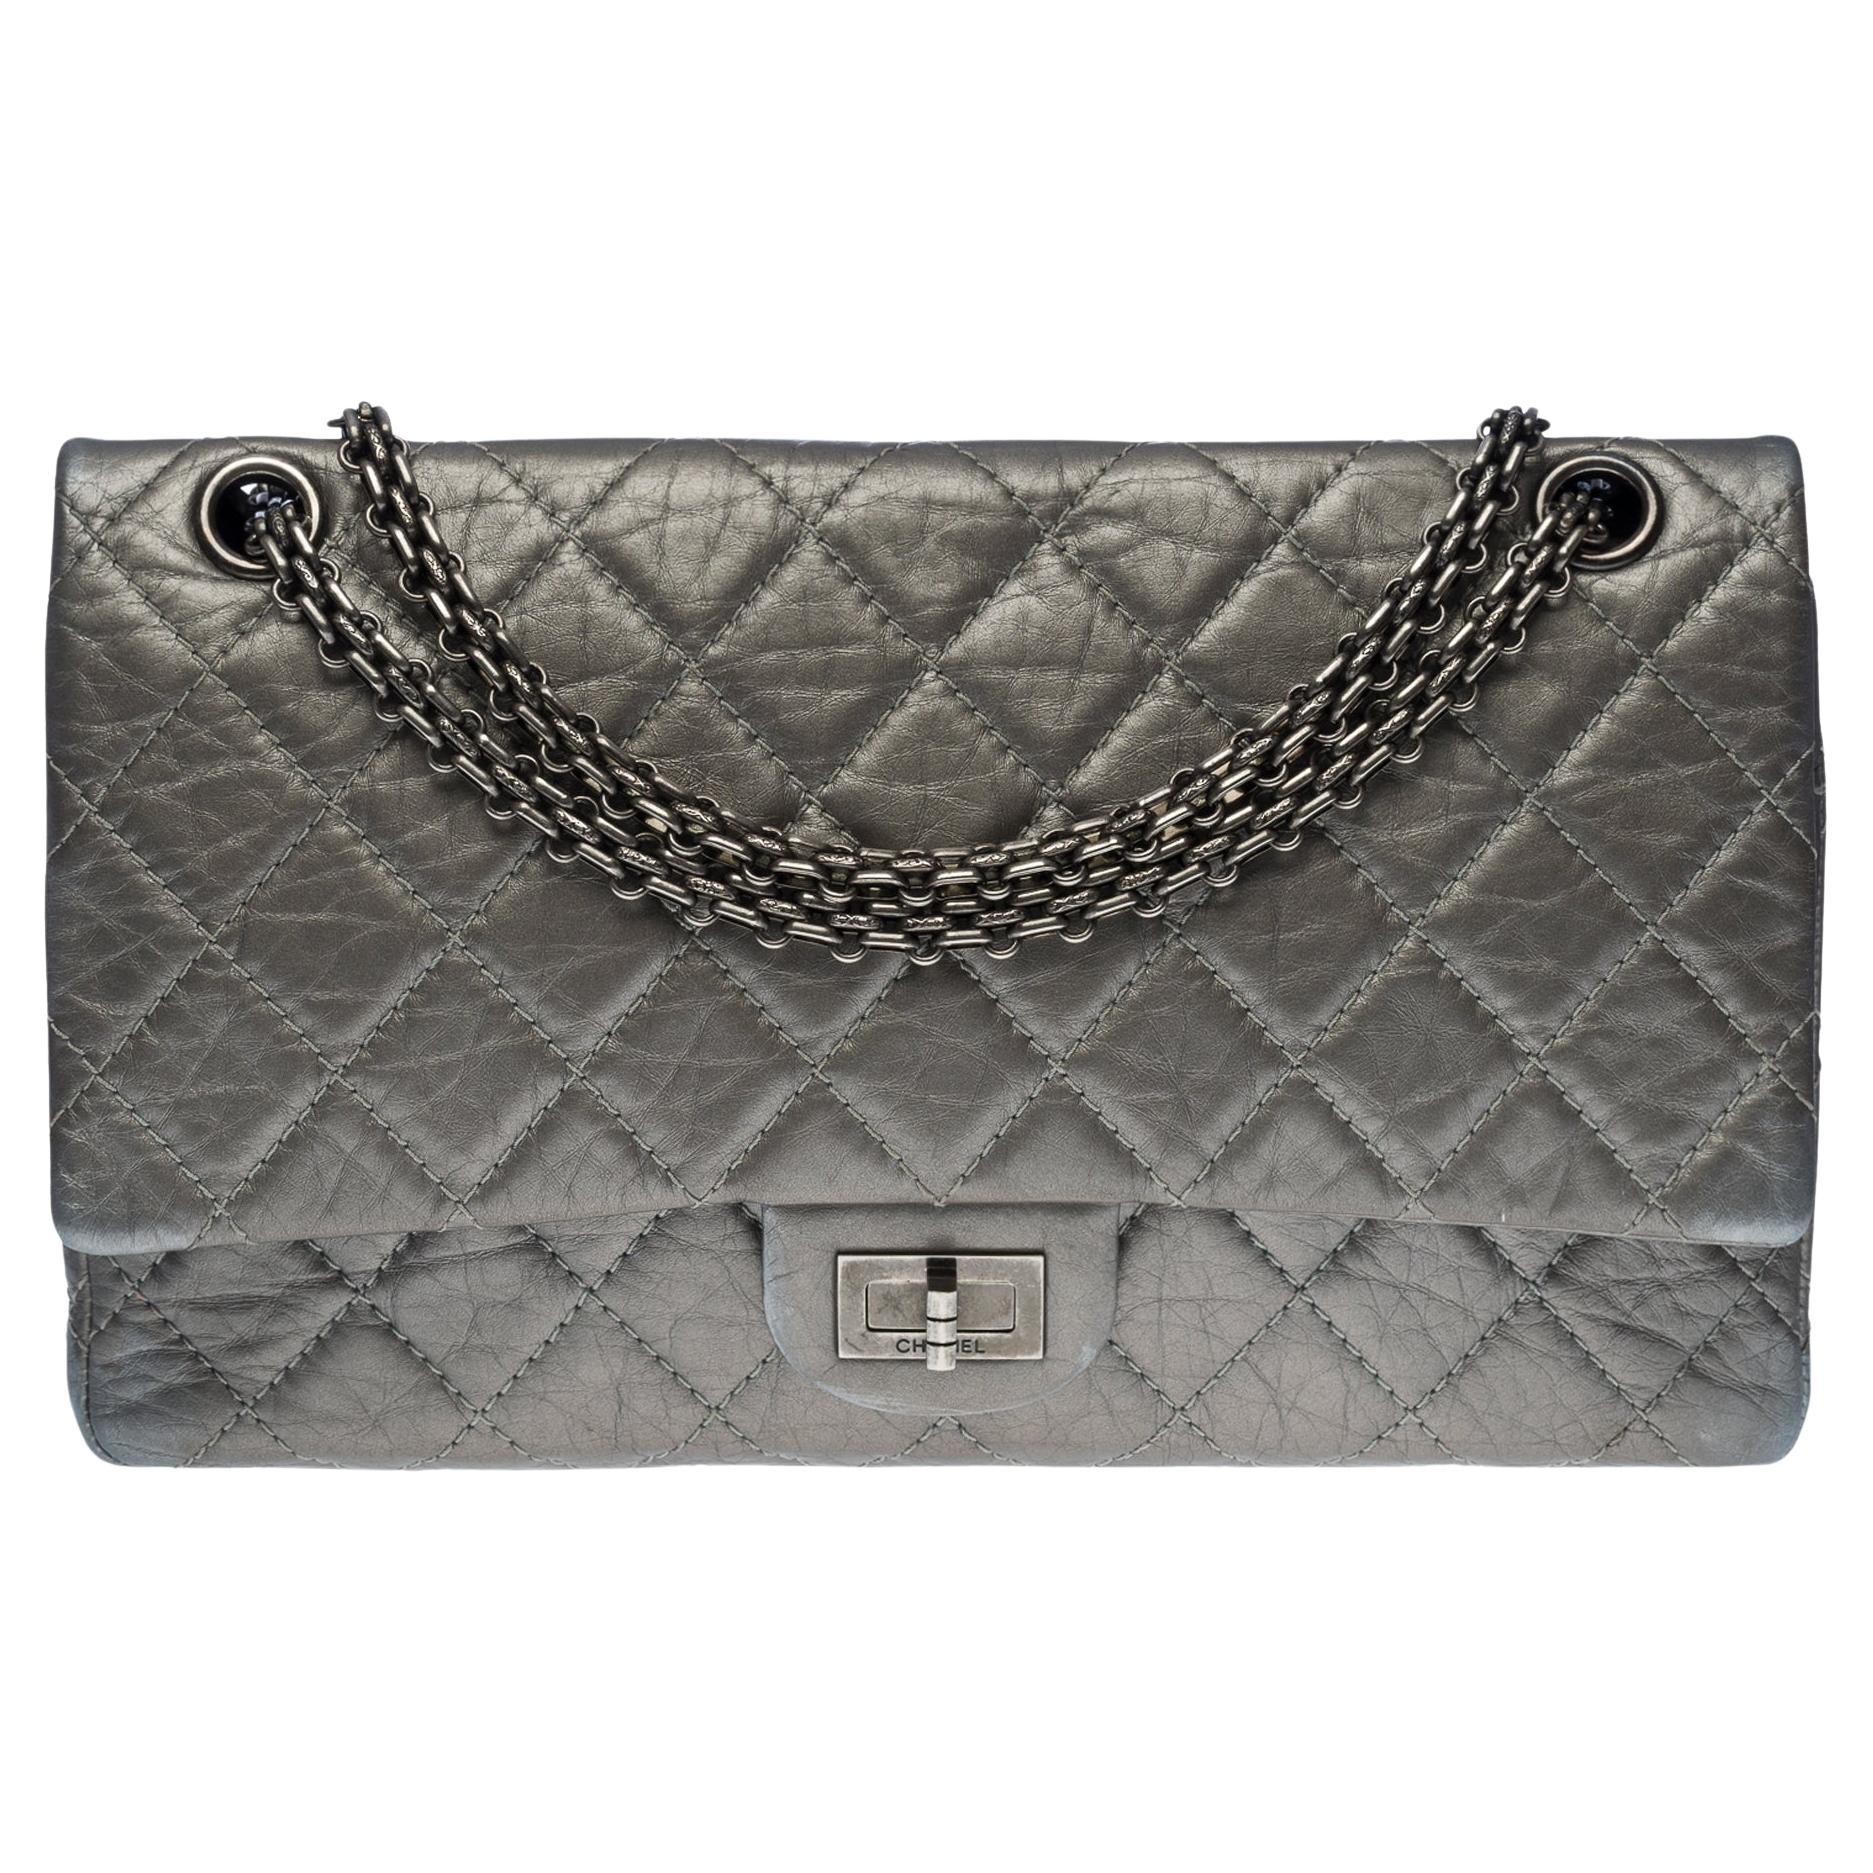 The Chanel 2.55 Classique double flap handbag inquilted leather with metallic si For Sale